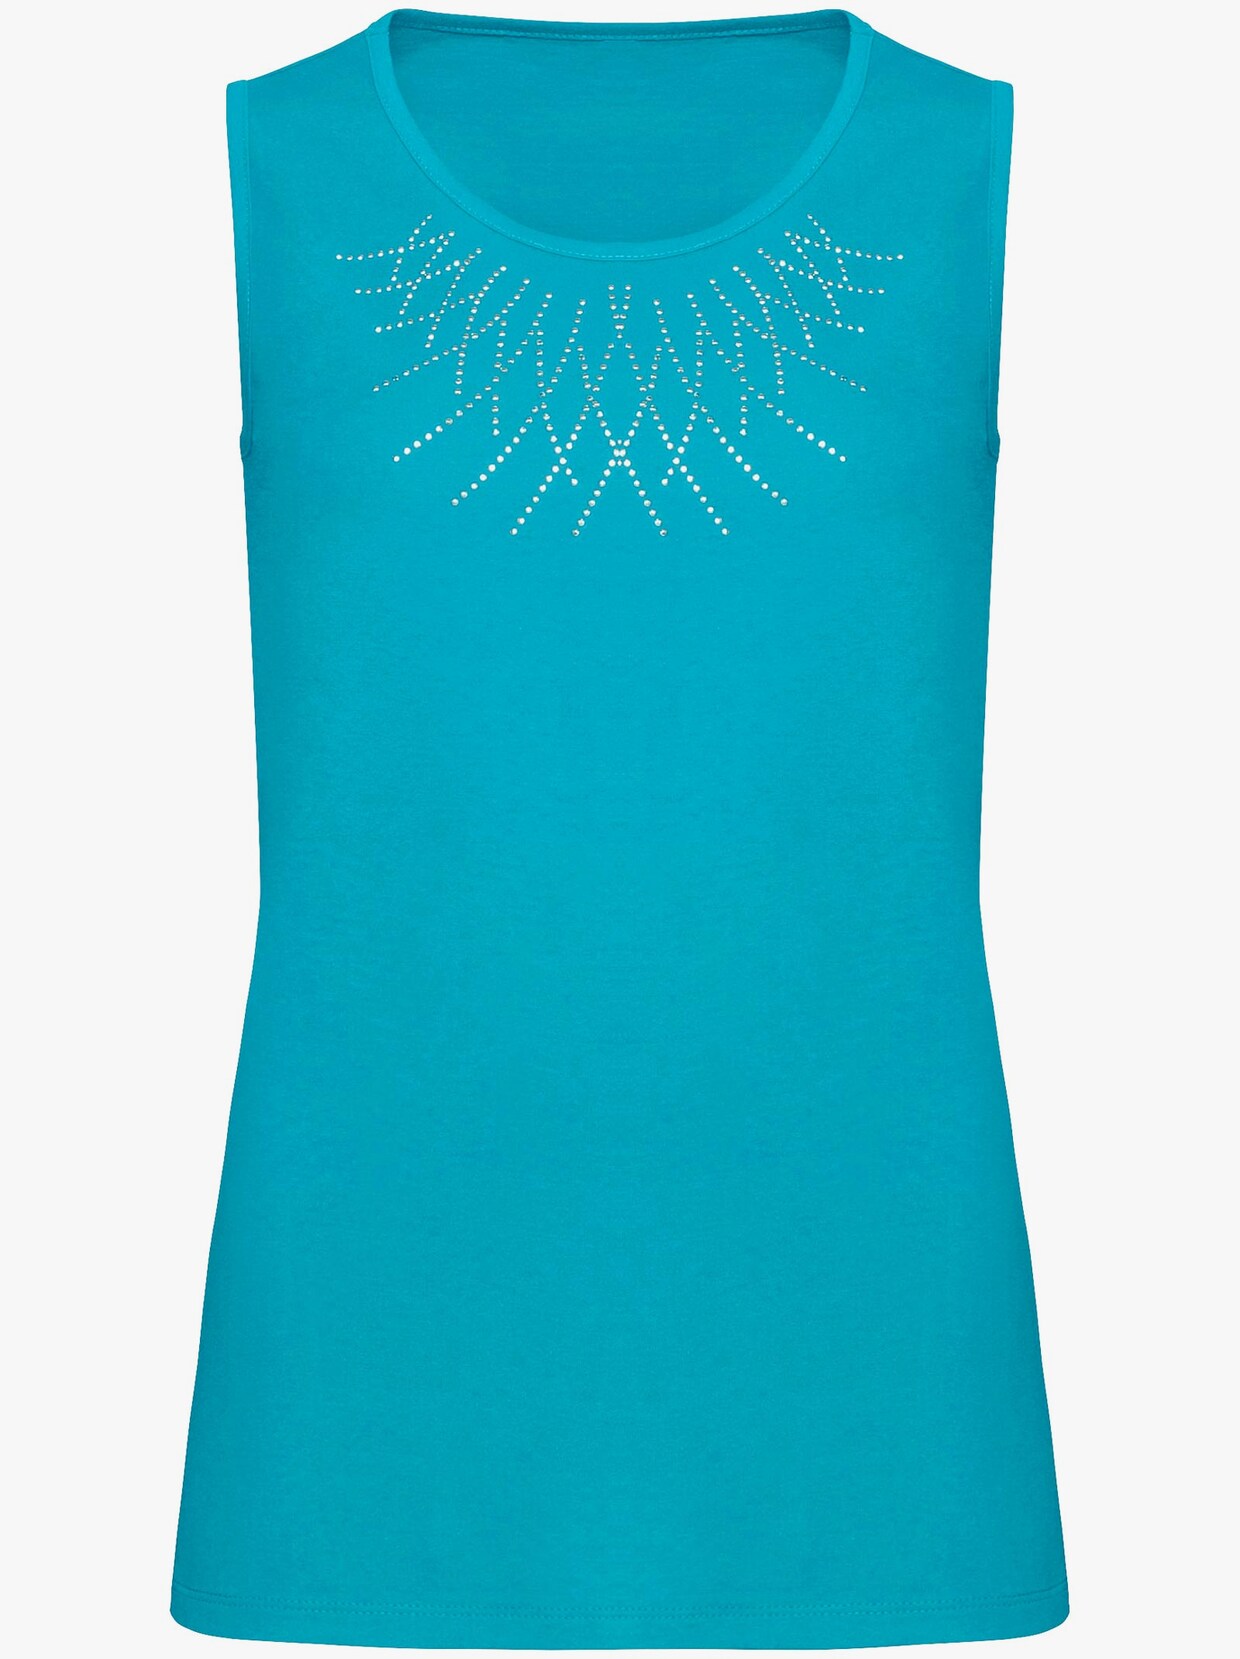 Top - turquoise